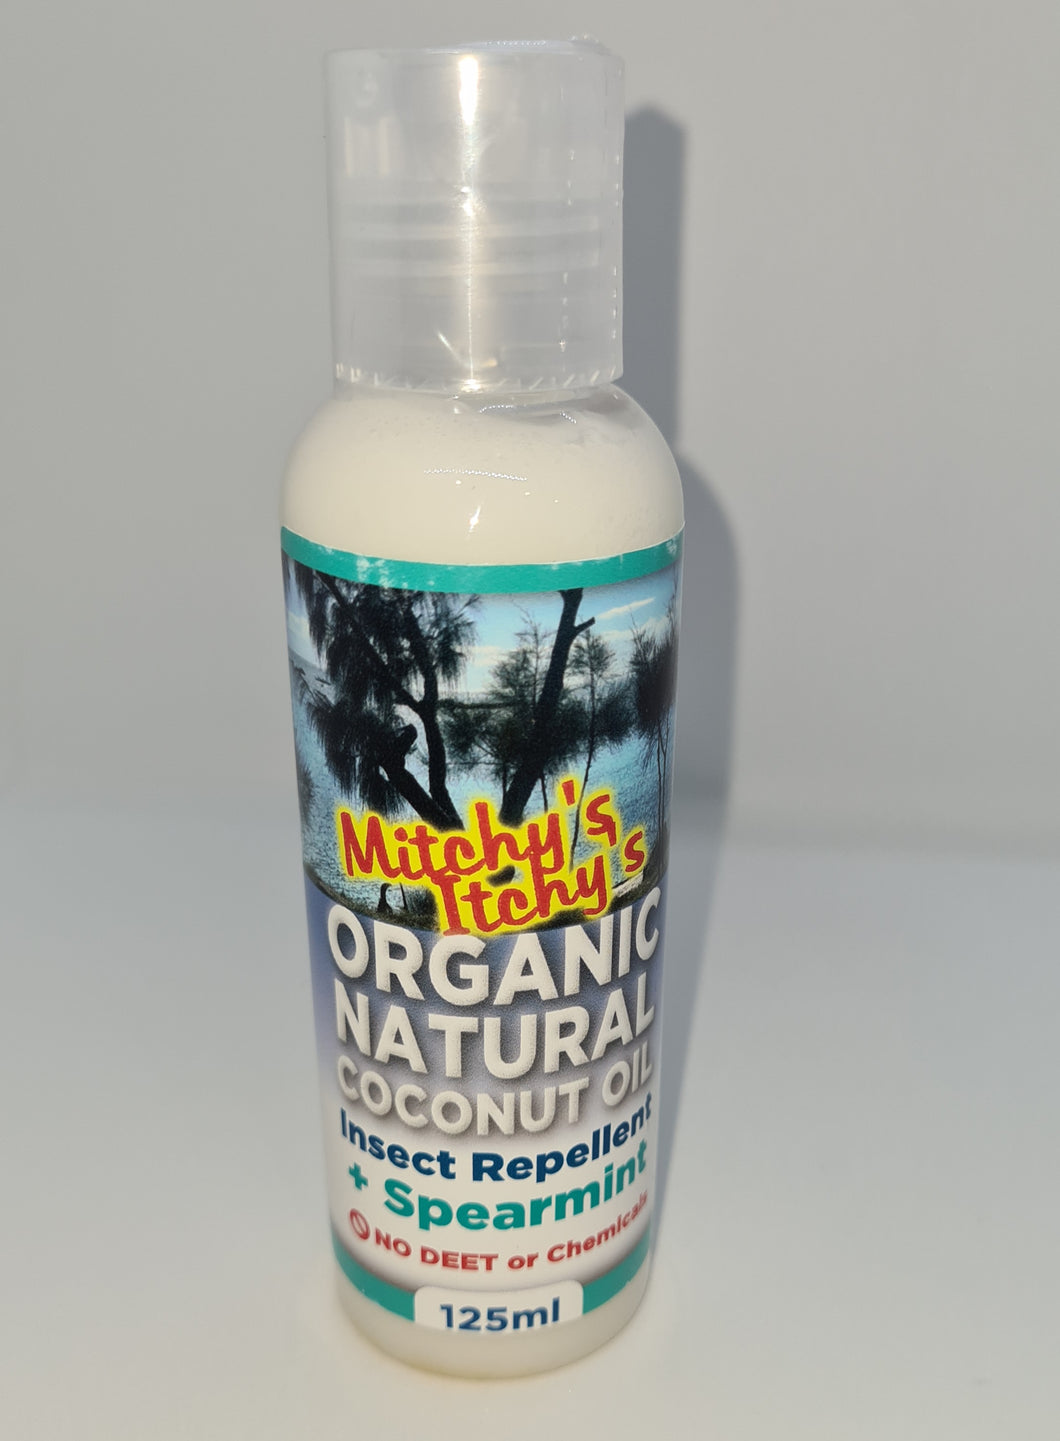 Mitchy's Itchy's Organic Natural Coconut Oil Insect Repellent 125ml